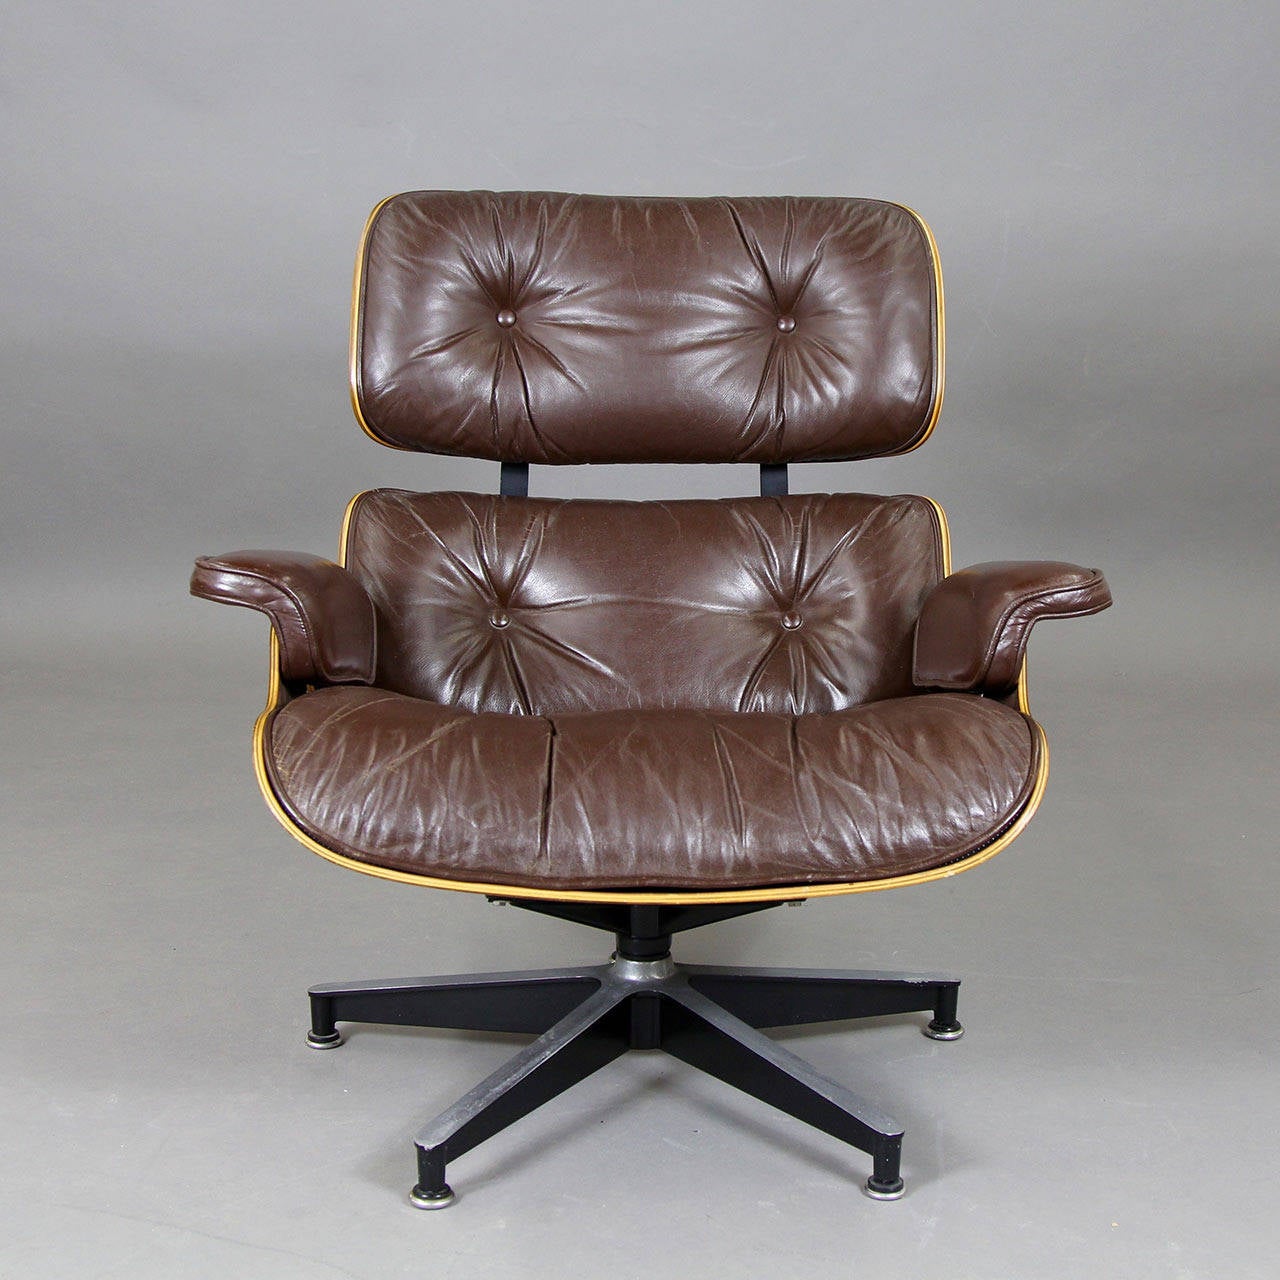 Iconic 670 Herman Miller Eames lounge chair.